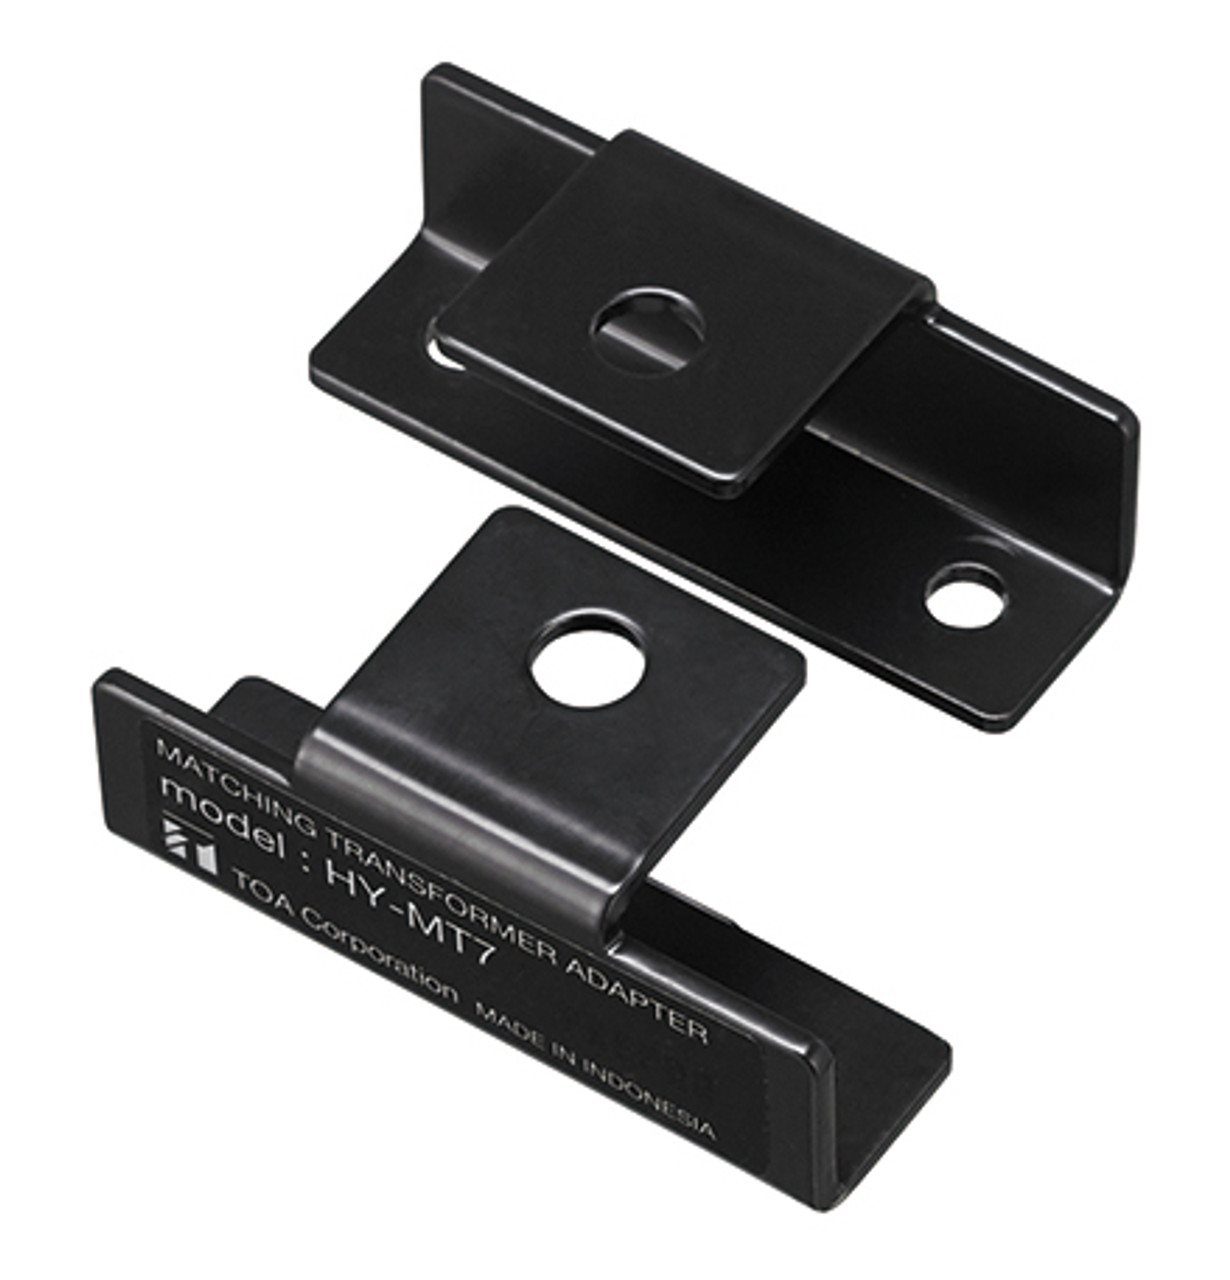 TOA HY-MT7 Bracket For Mounting MT-200 To HX-7 Loudspeakers